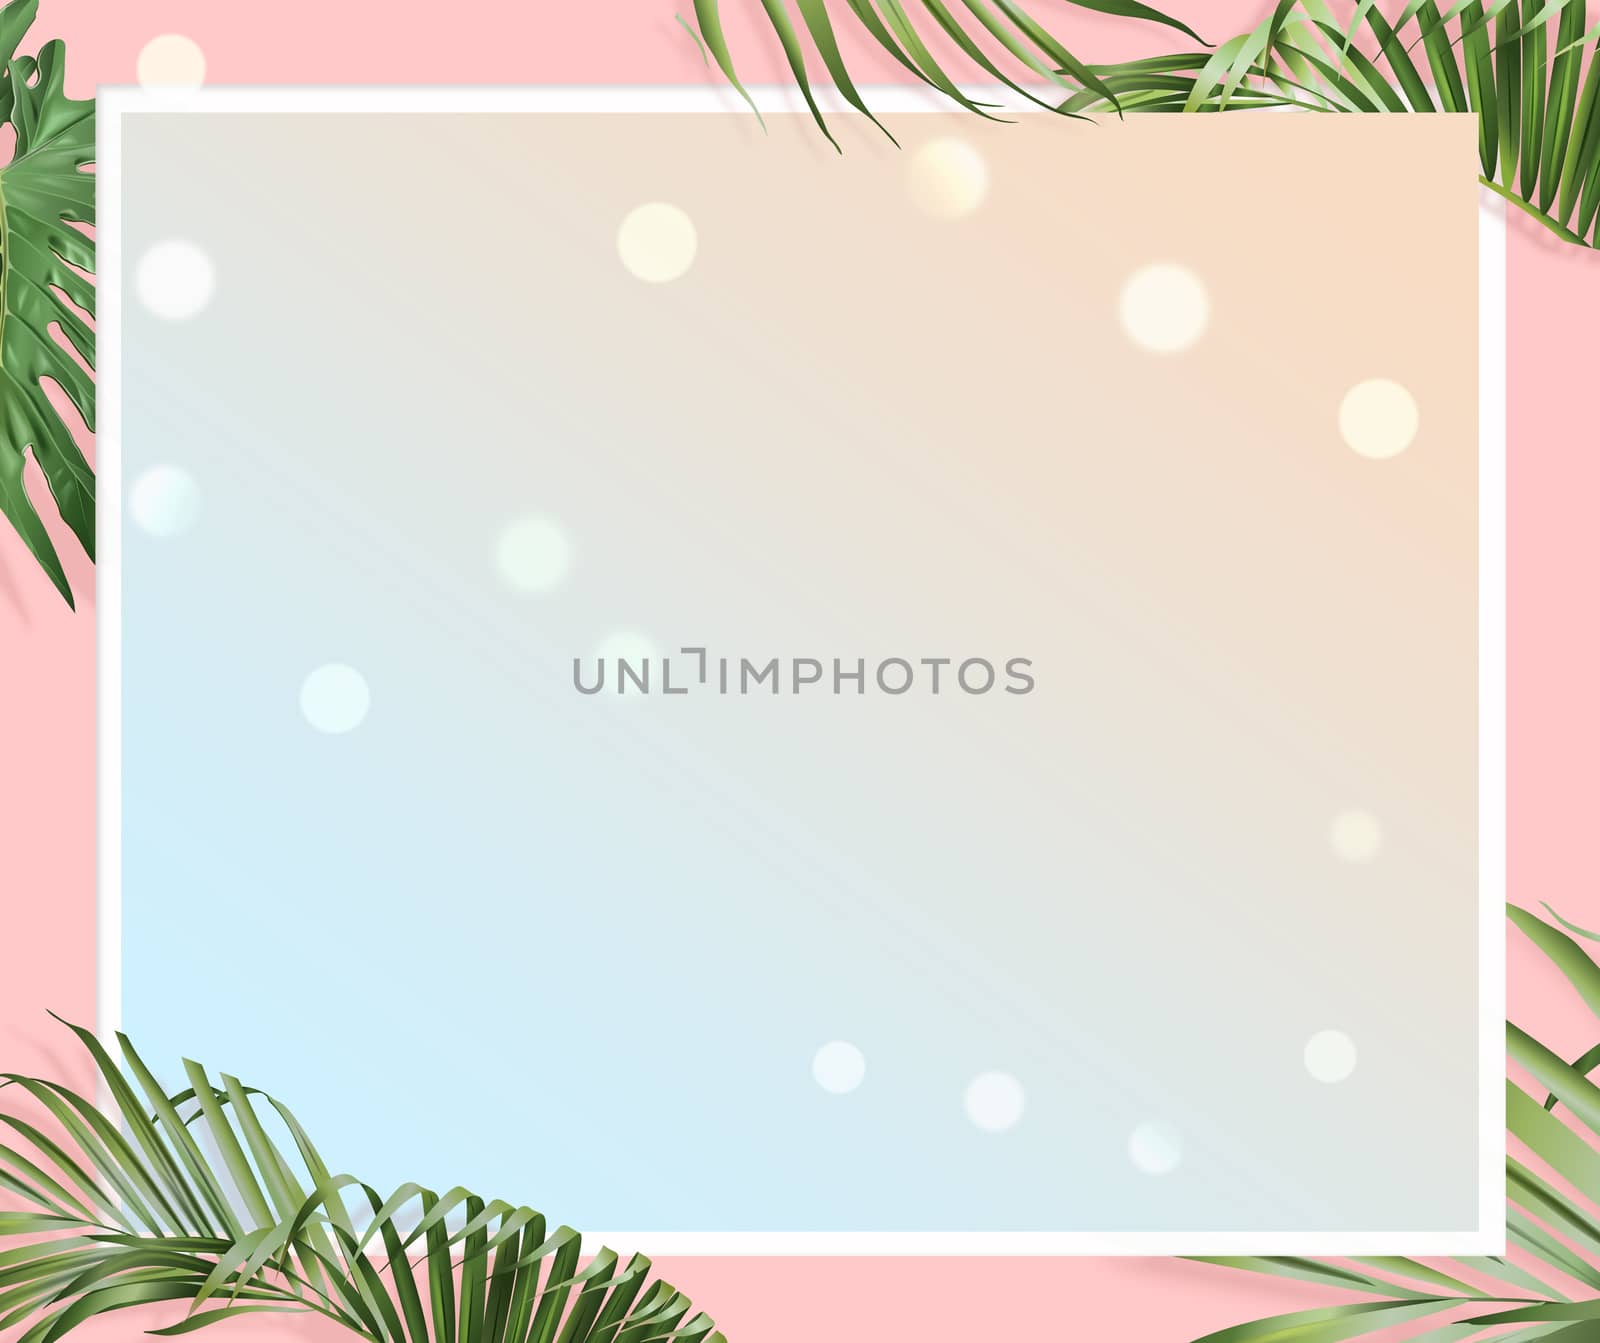 The website banner with pink background, euclidean and palm leaves border by cougarsan